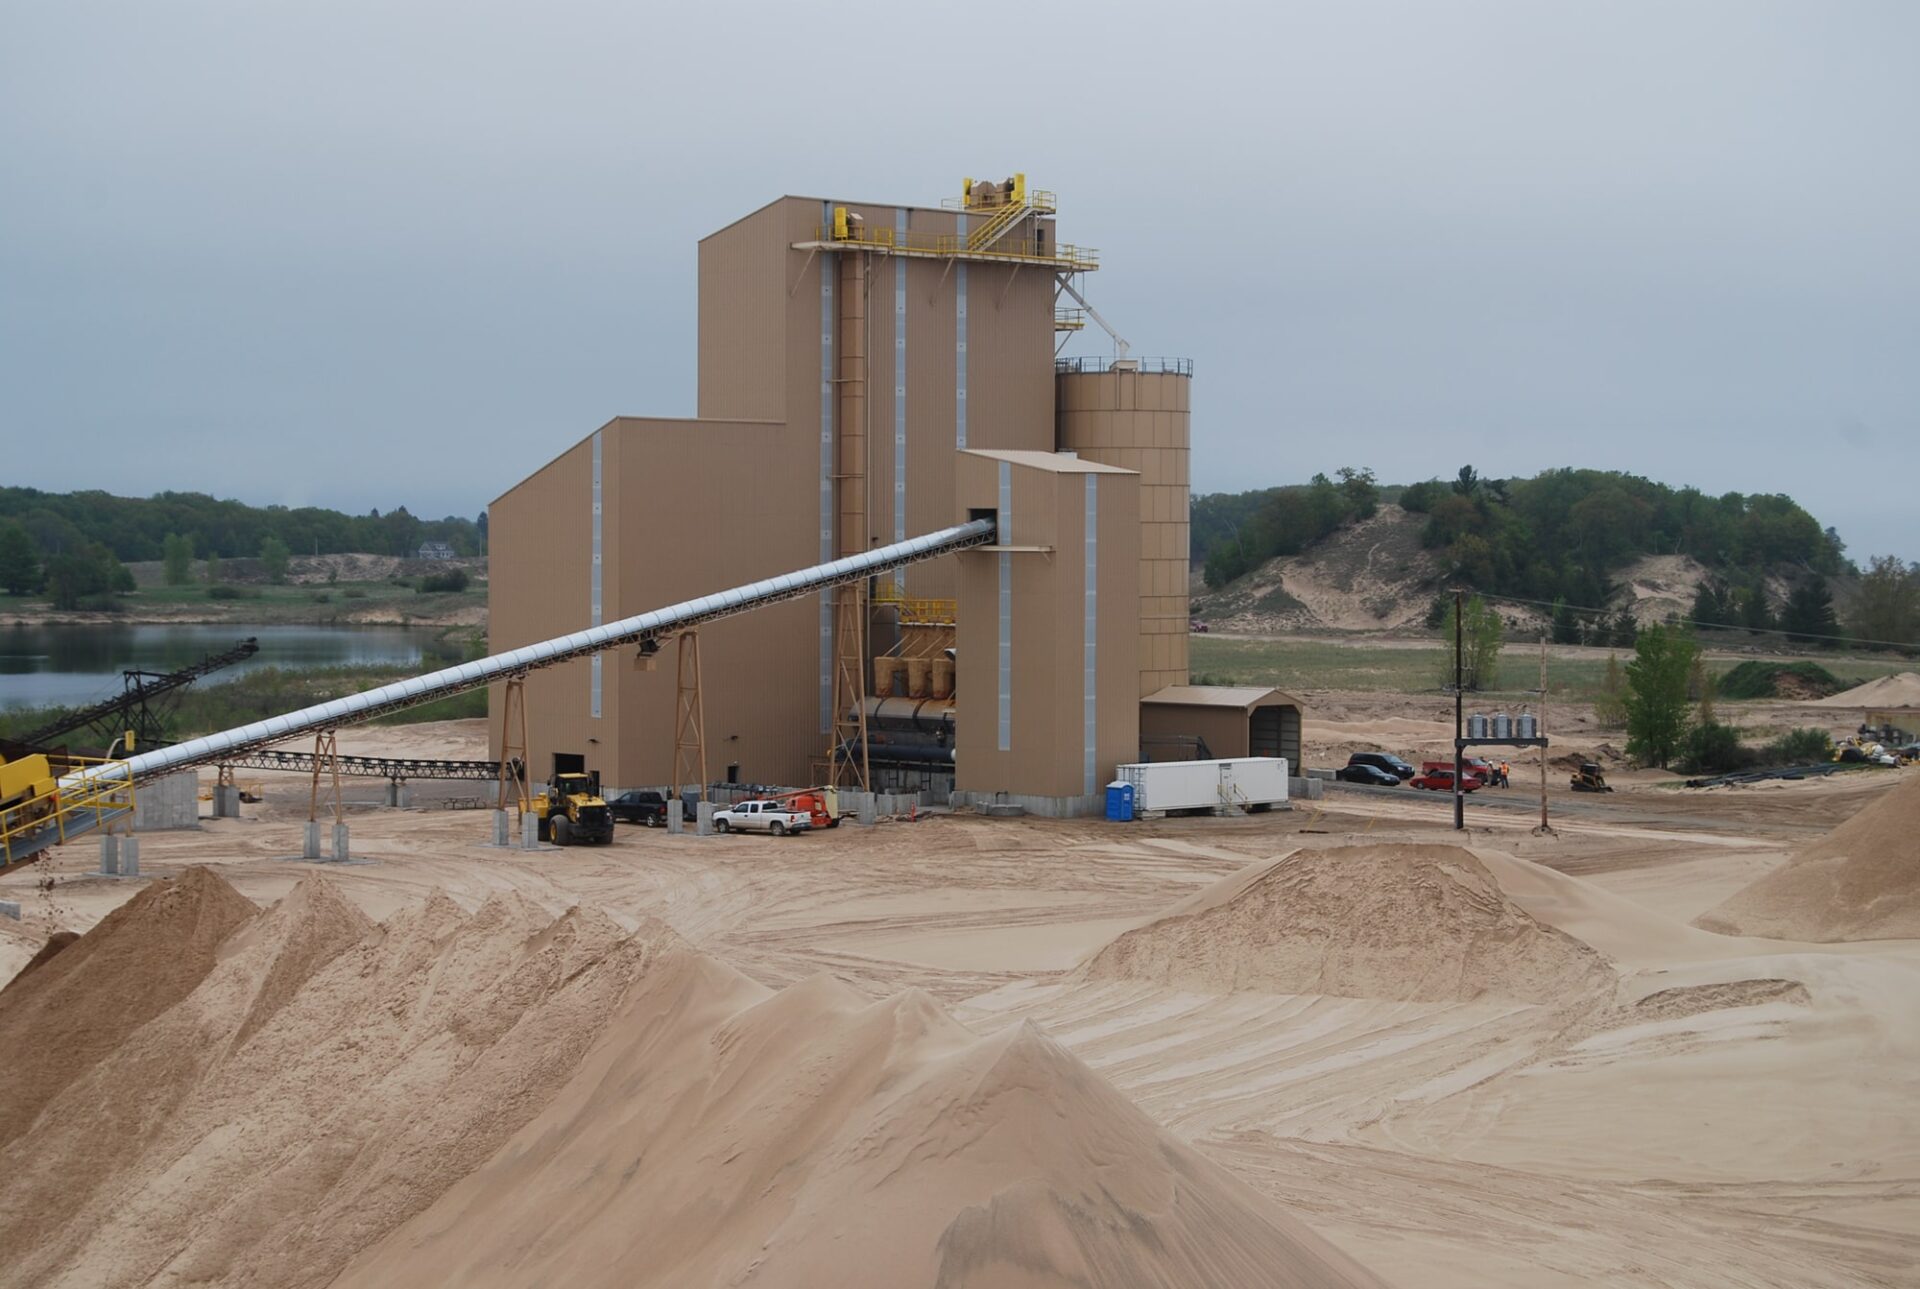 A dry plant partially built